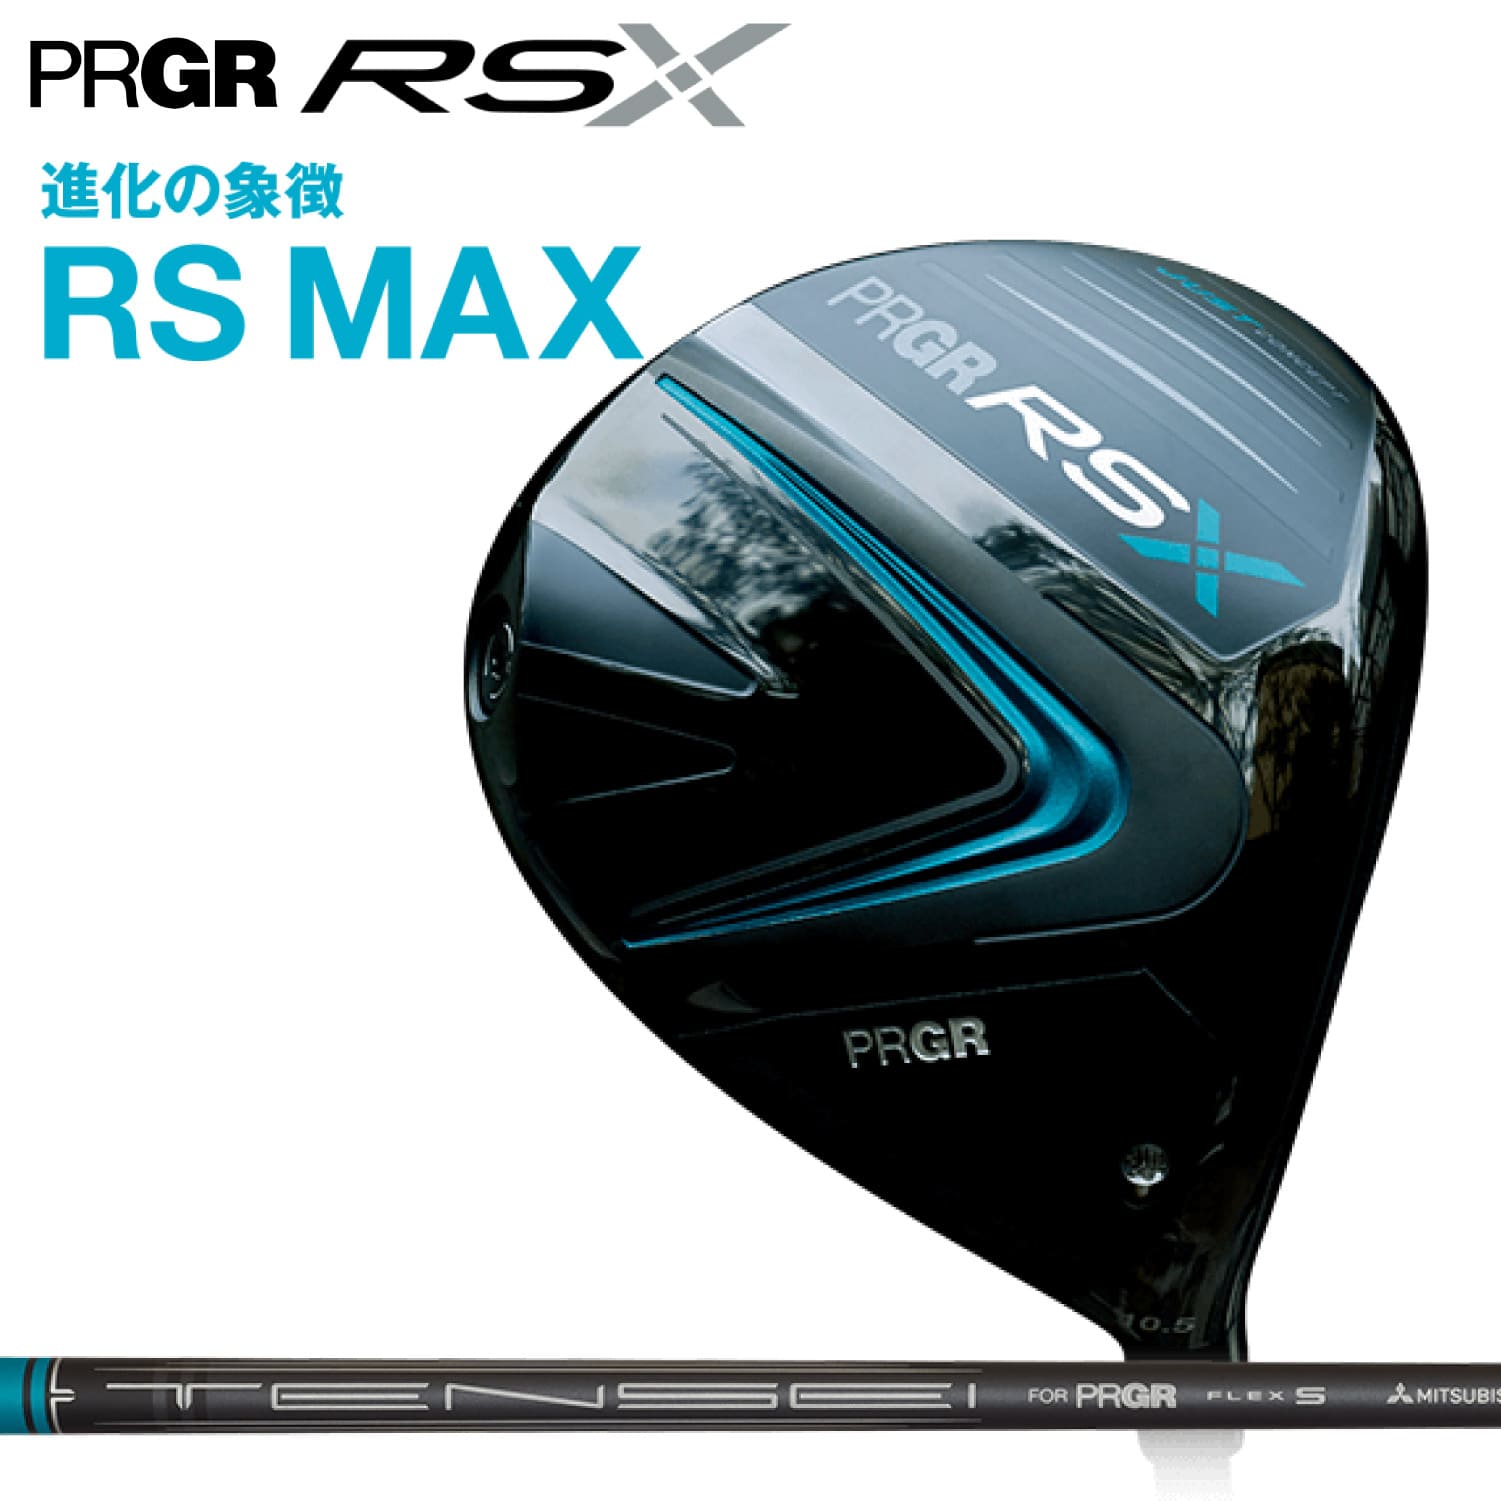 PRGR RS X DRIVER RS MAX TENSEI FOR PRGR